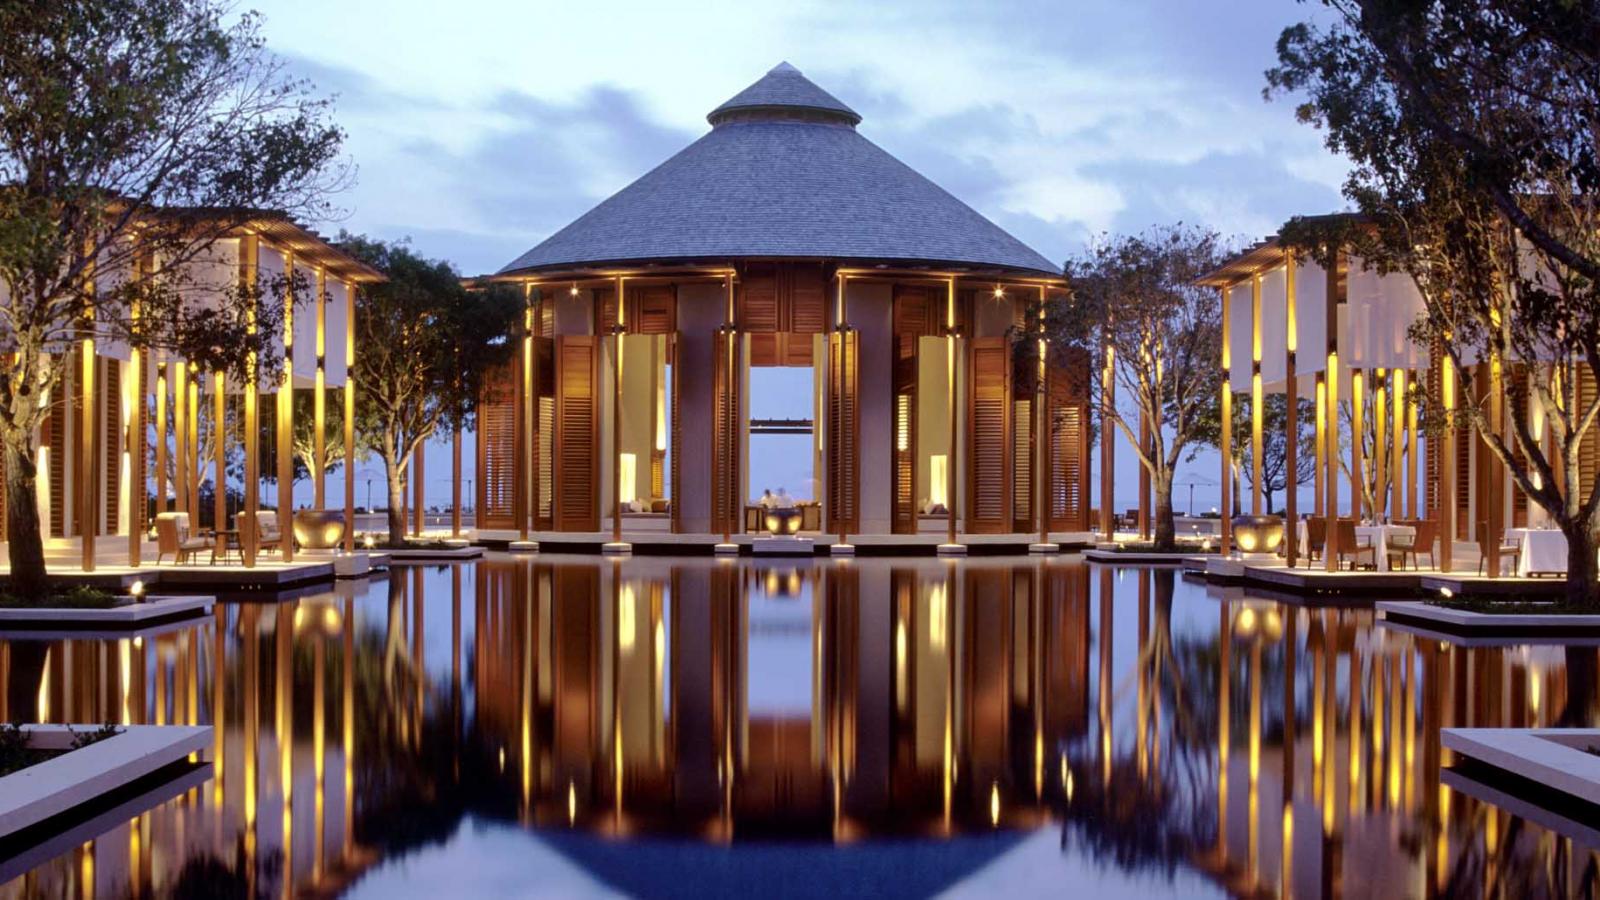 Our stay at Amanyara in Turks+Caicos